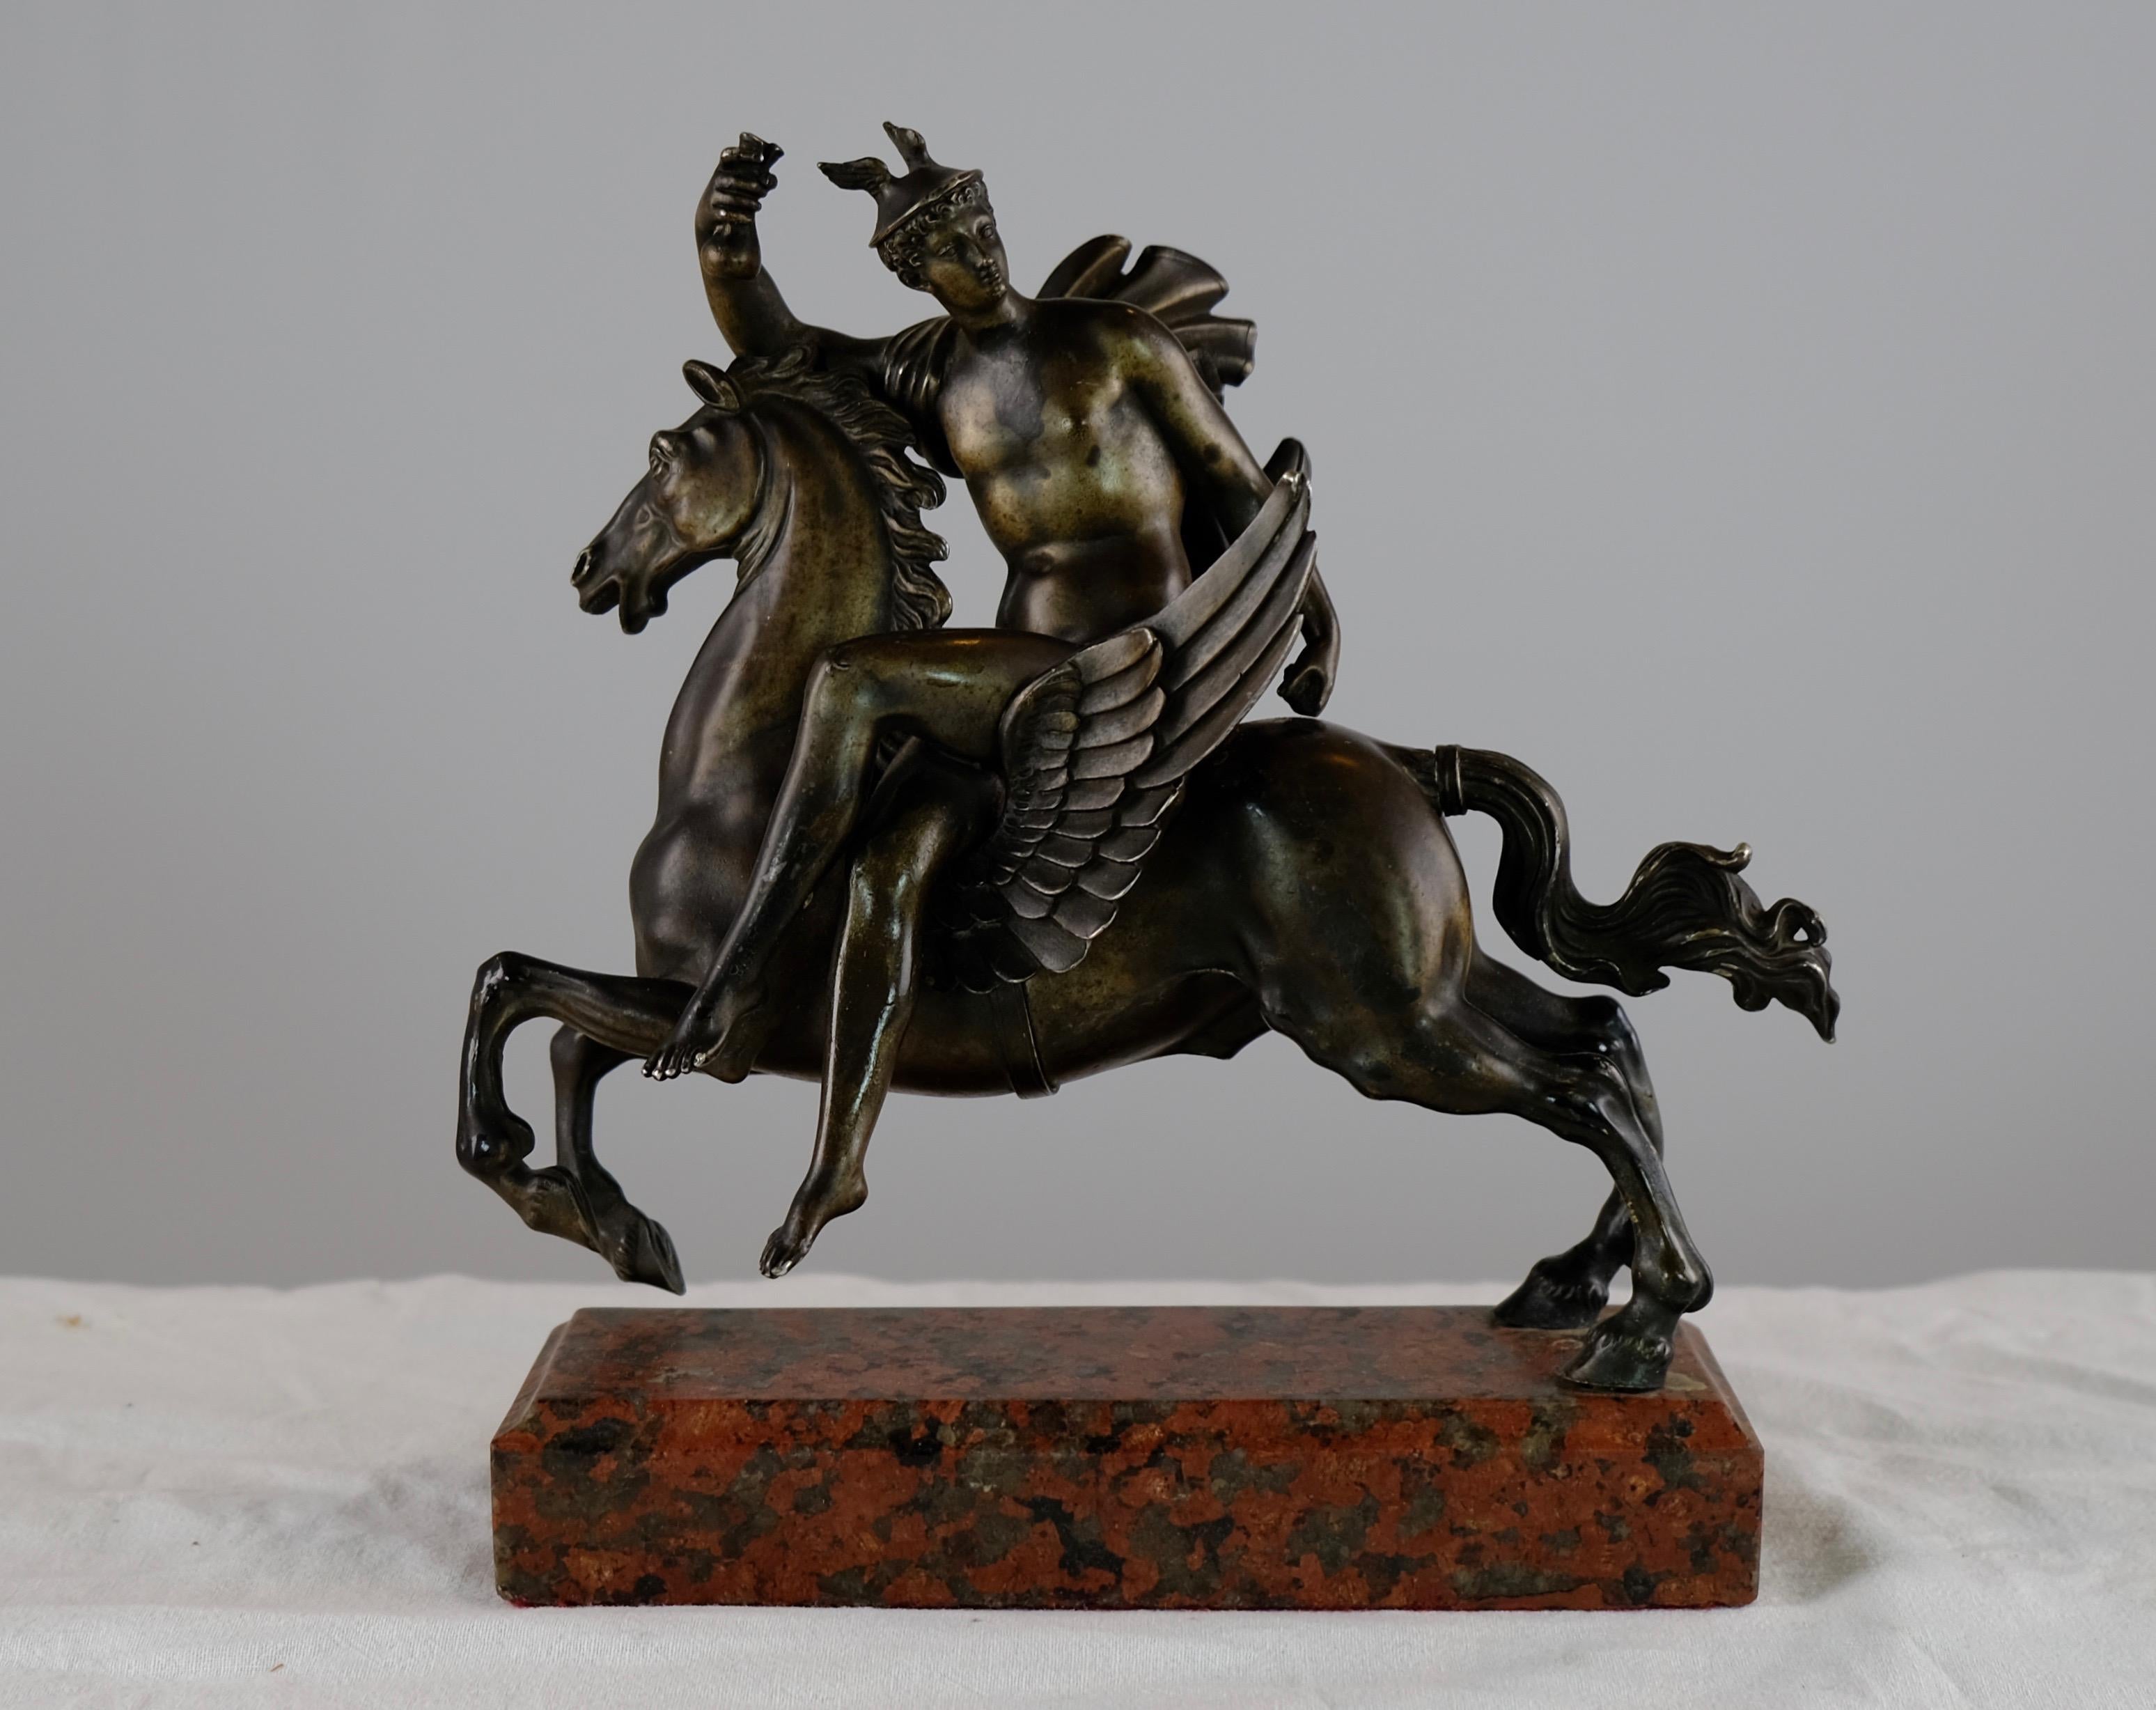 This sculpture is a small masterpiece. The casting is of the best quality with the horse and figure made of several separate pieces mounted together to make this marvellous sculpture. The cast is made of bronze and is originally silvered. The